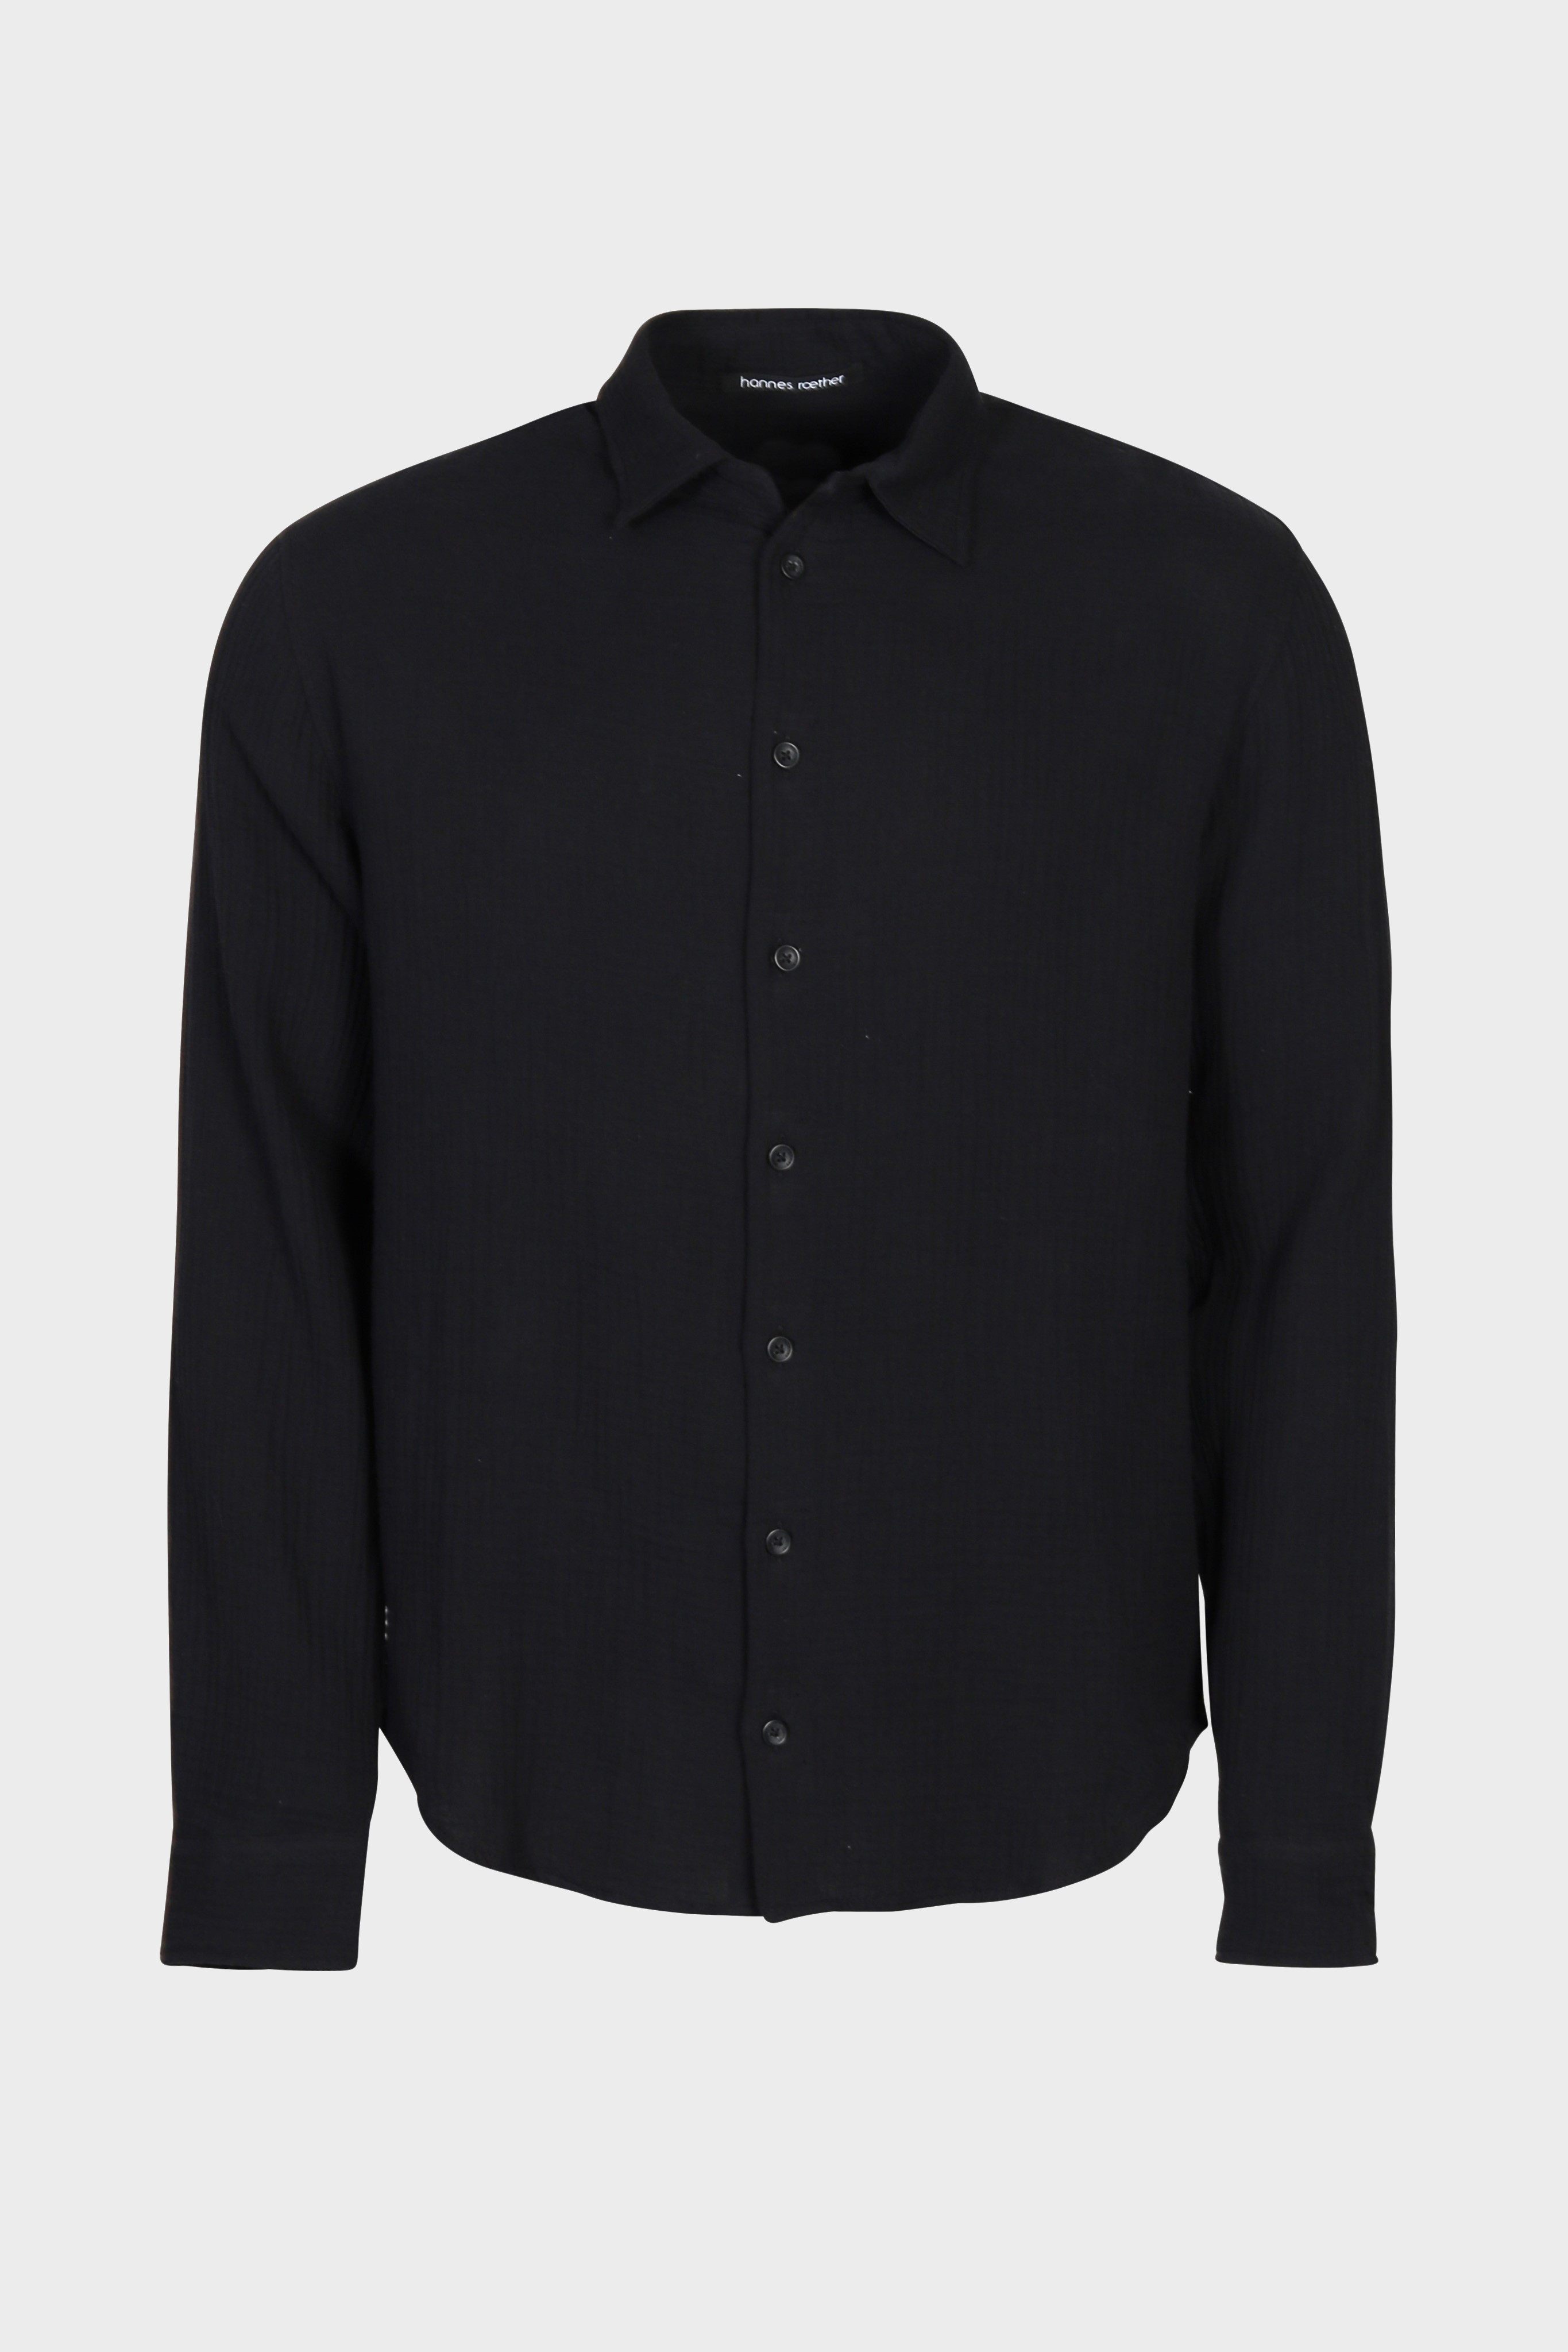 HANNES ROETHER Mousseline Shirt in Black